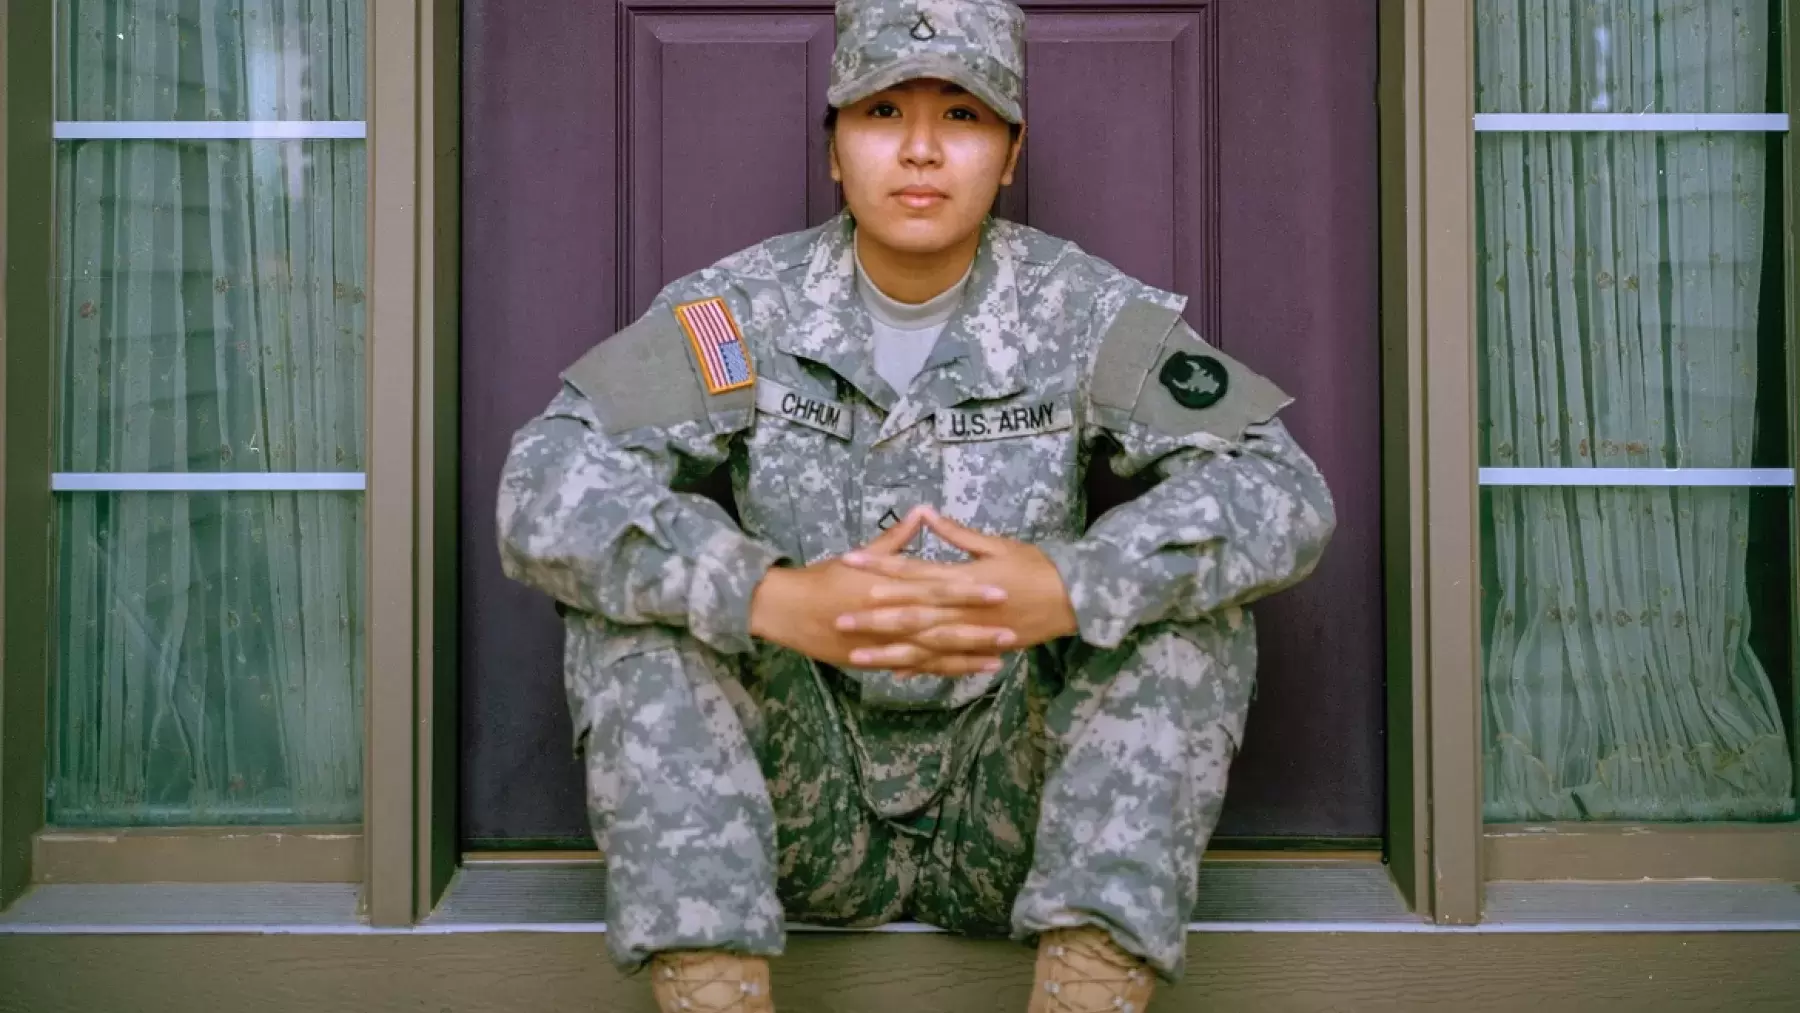 A feminine presenting soldier sitting on a porch in front of a purple door.